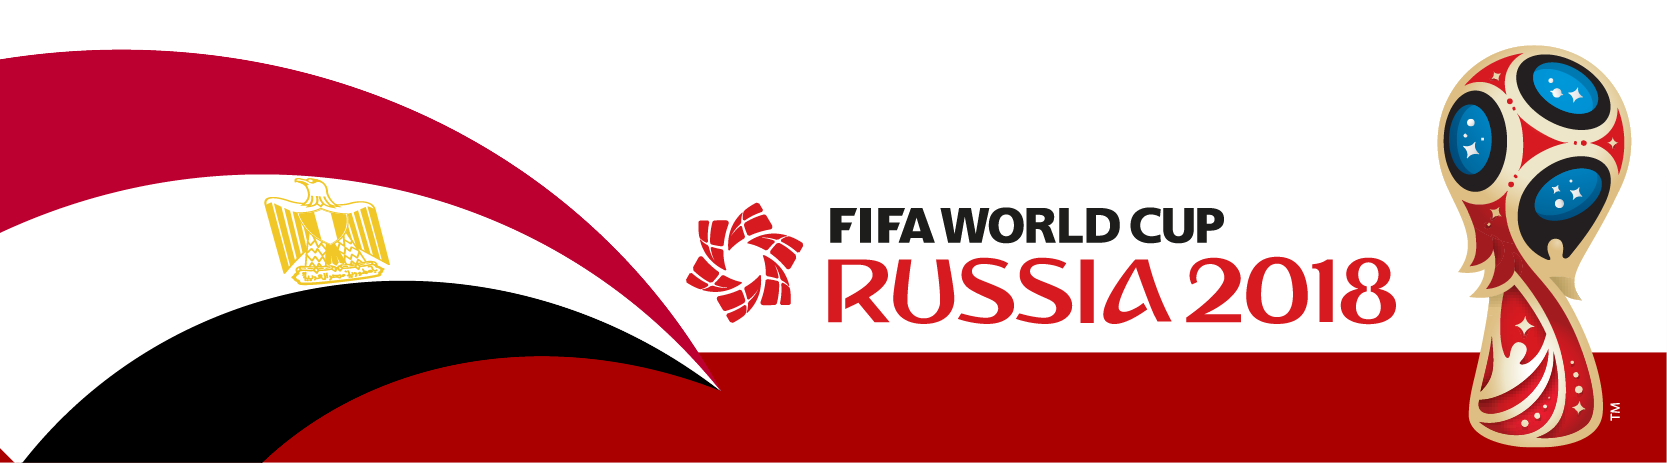 2018 Fifa World Cup Download Transparent Png Image Png Arts